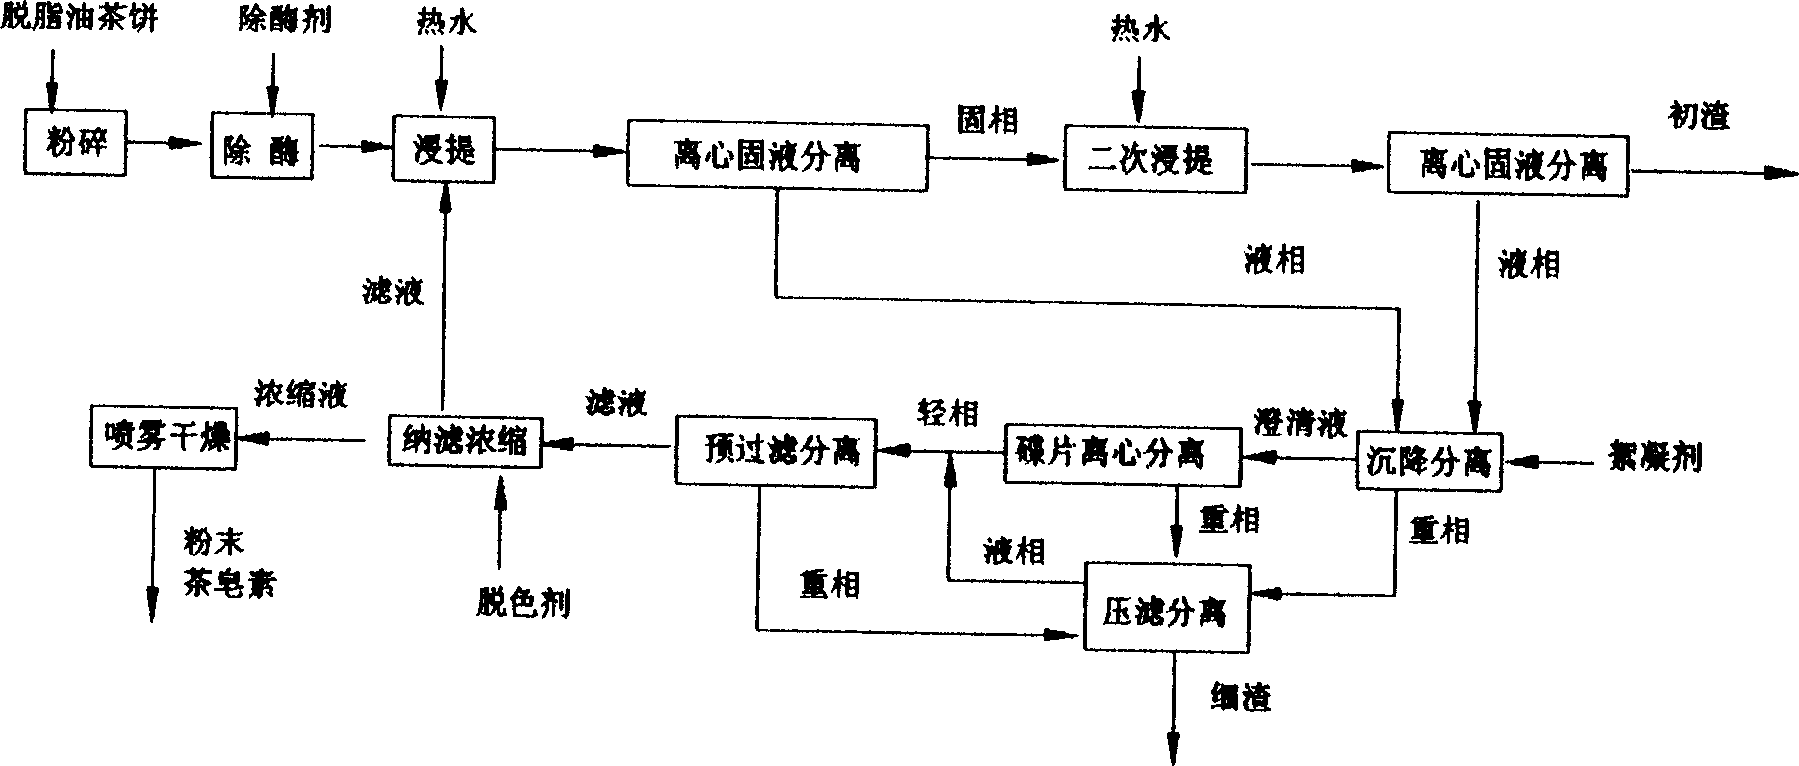 Production process for extracting tea saponin from tea-oil tree cake by using water as dissoluent